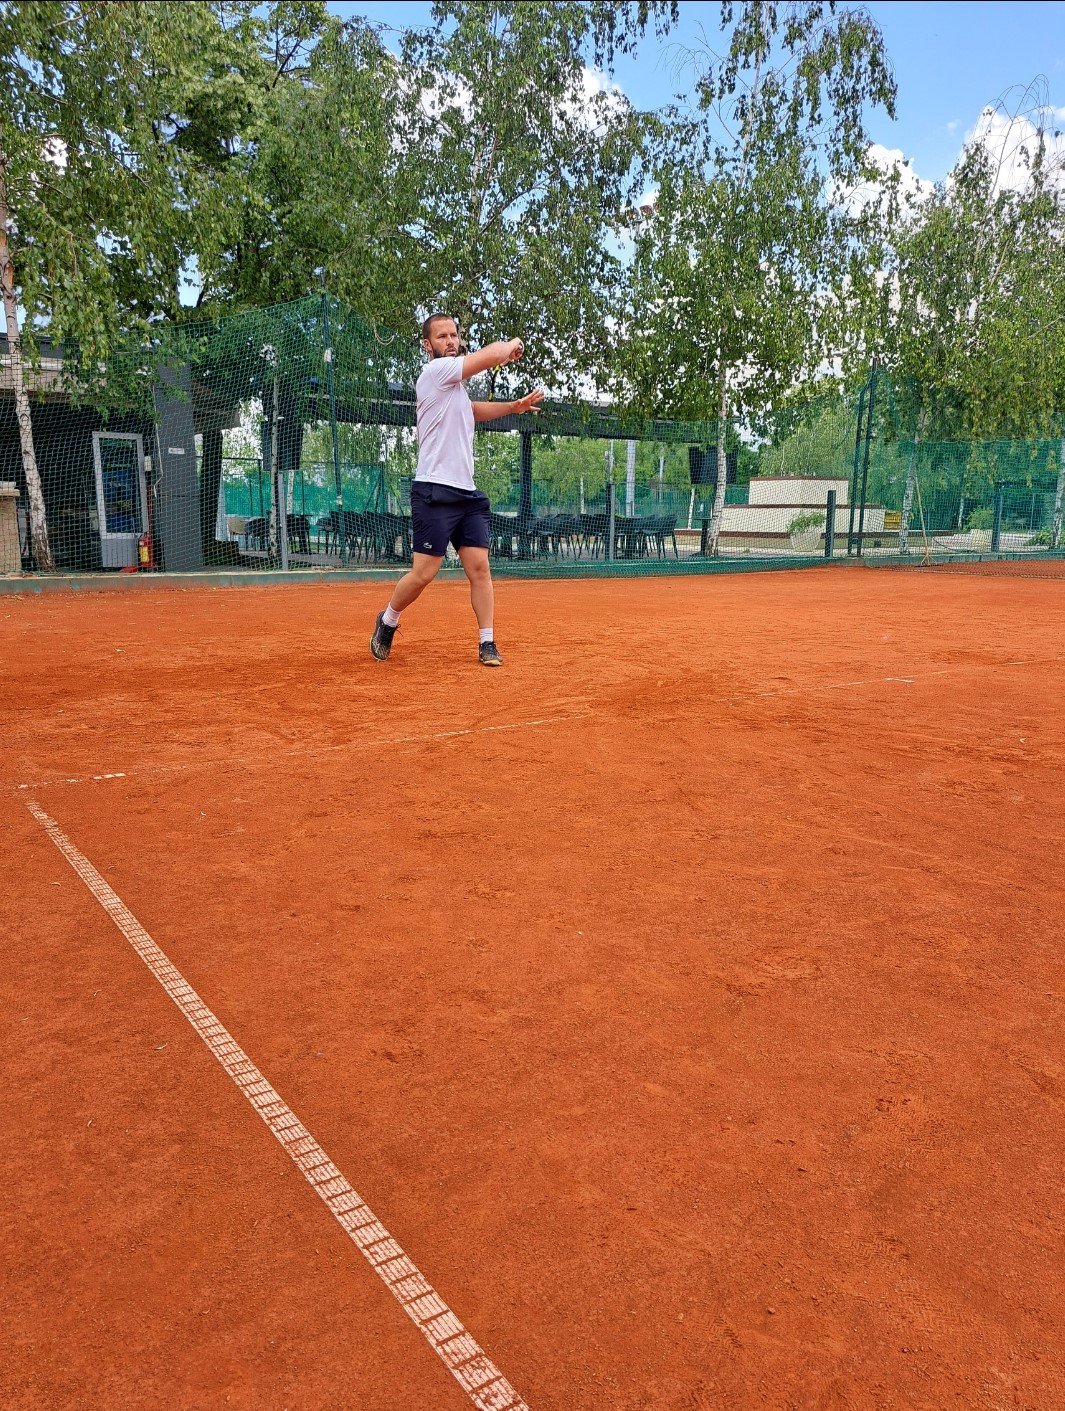 How to Hit a Forehand in Tennis - Our Top Tips Revealed